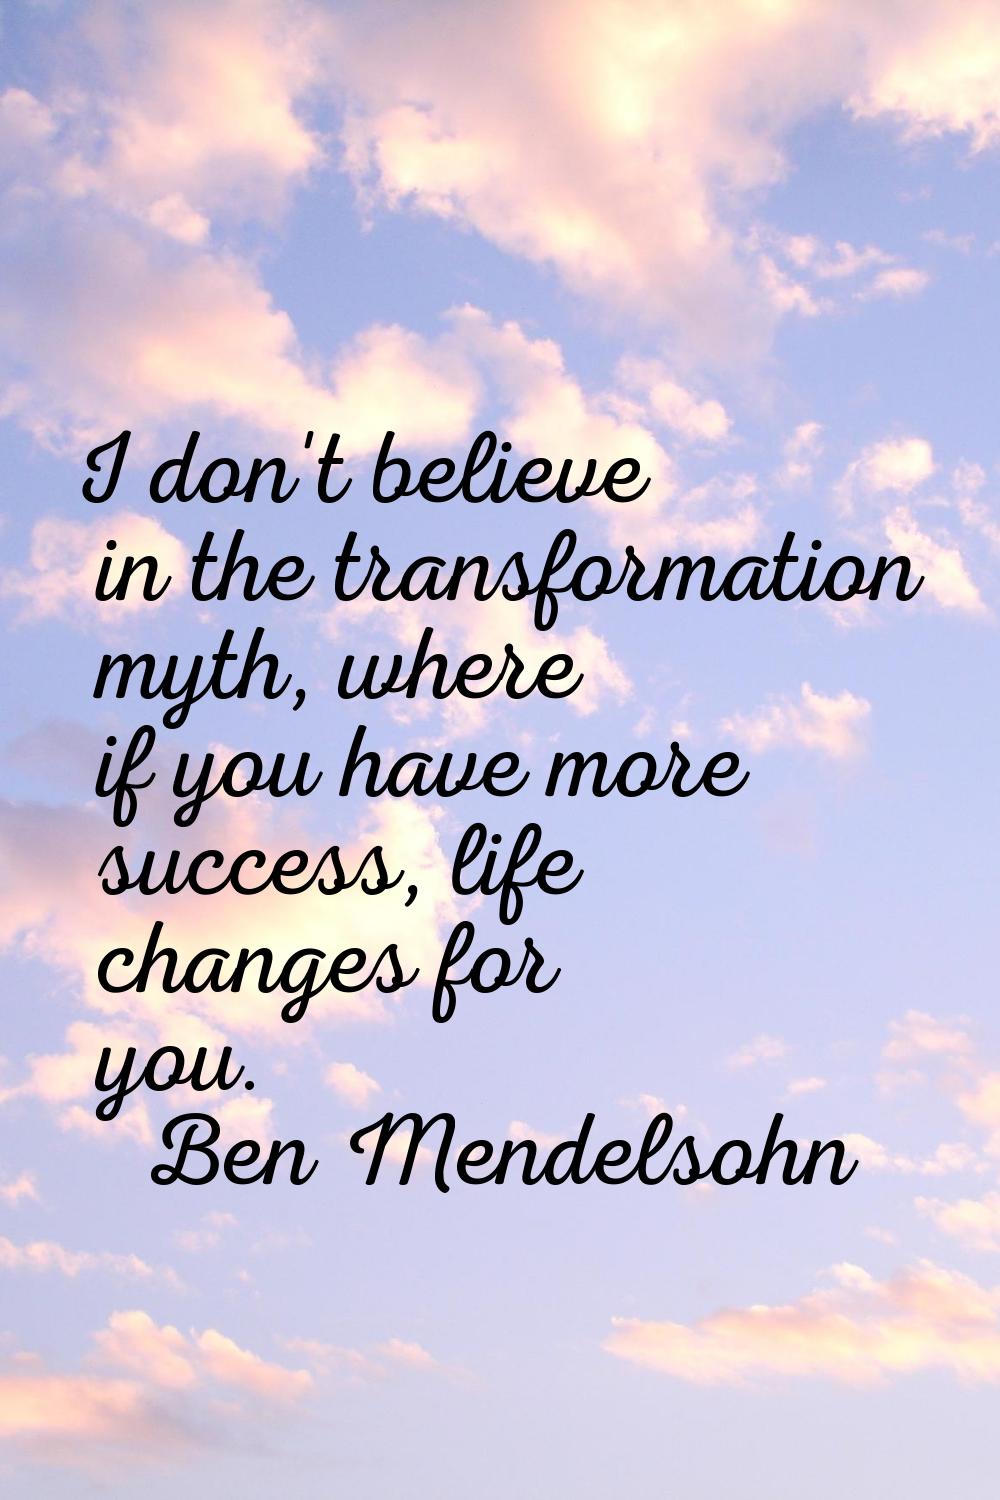 I don't believe in the transformation myth, where if you have more success, life changes for you.